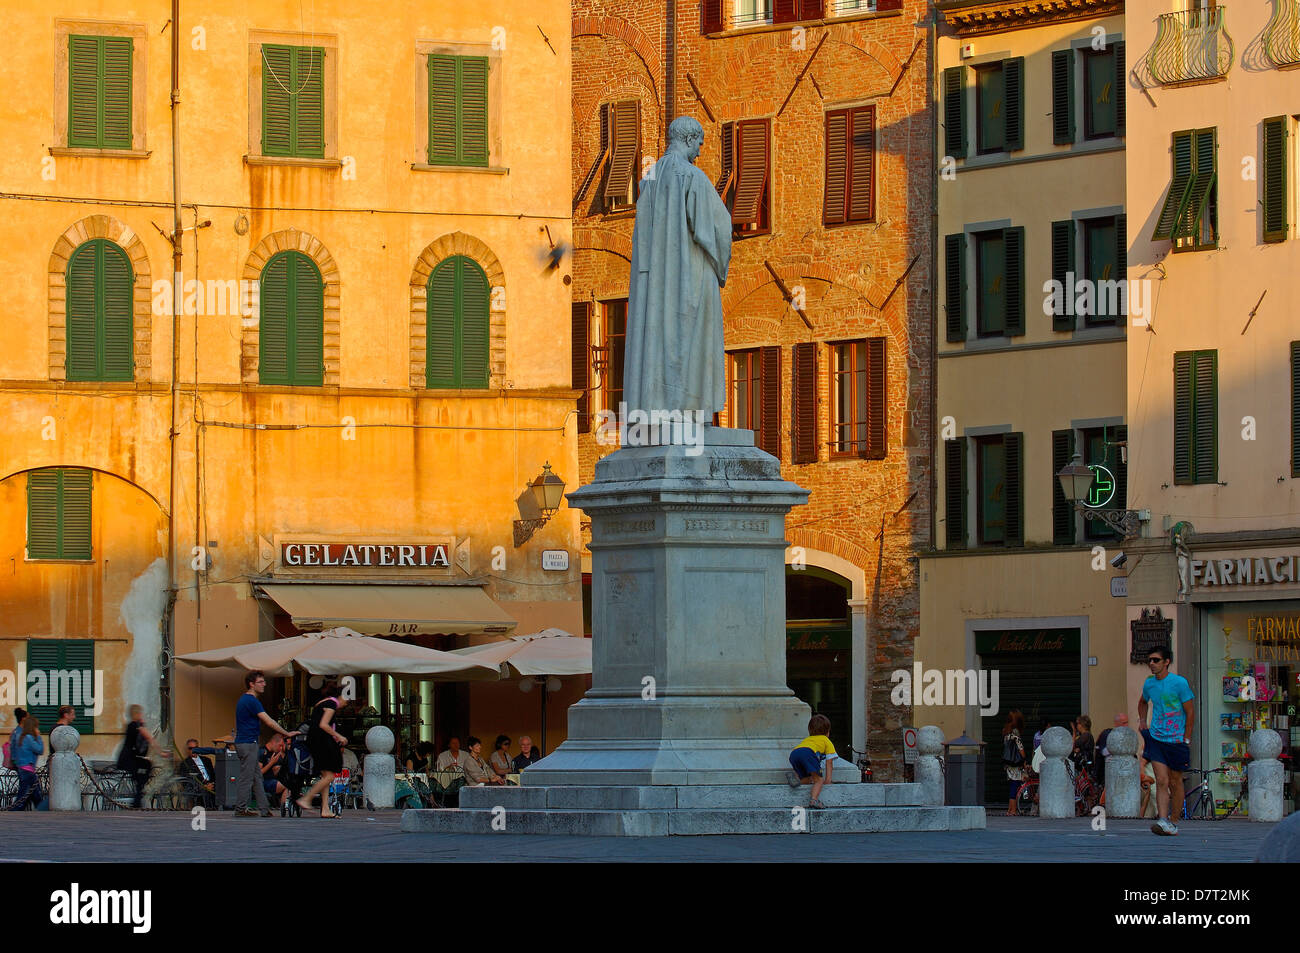 Lucca. San Michele square. Piazza san Michele. Tuscany. Italy. Europe Stock Photo